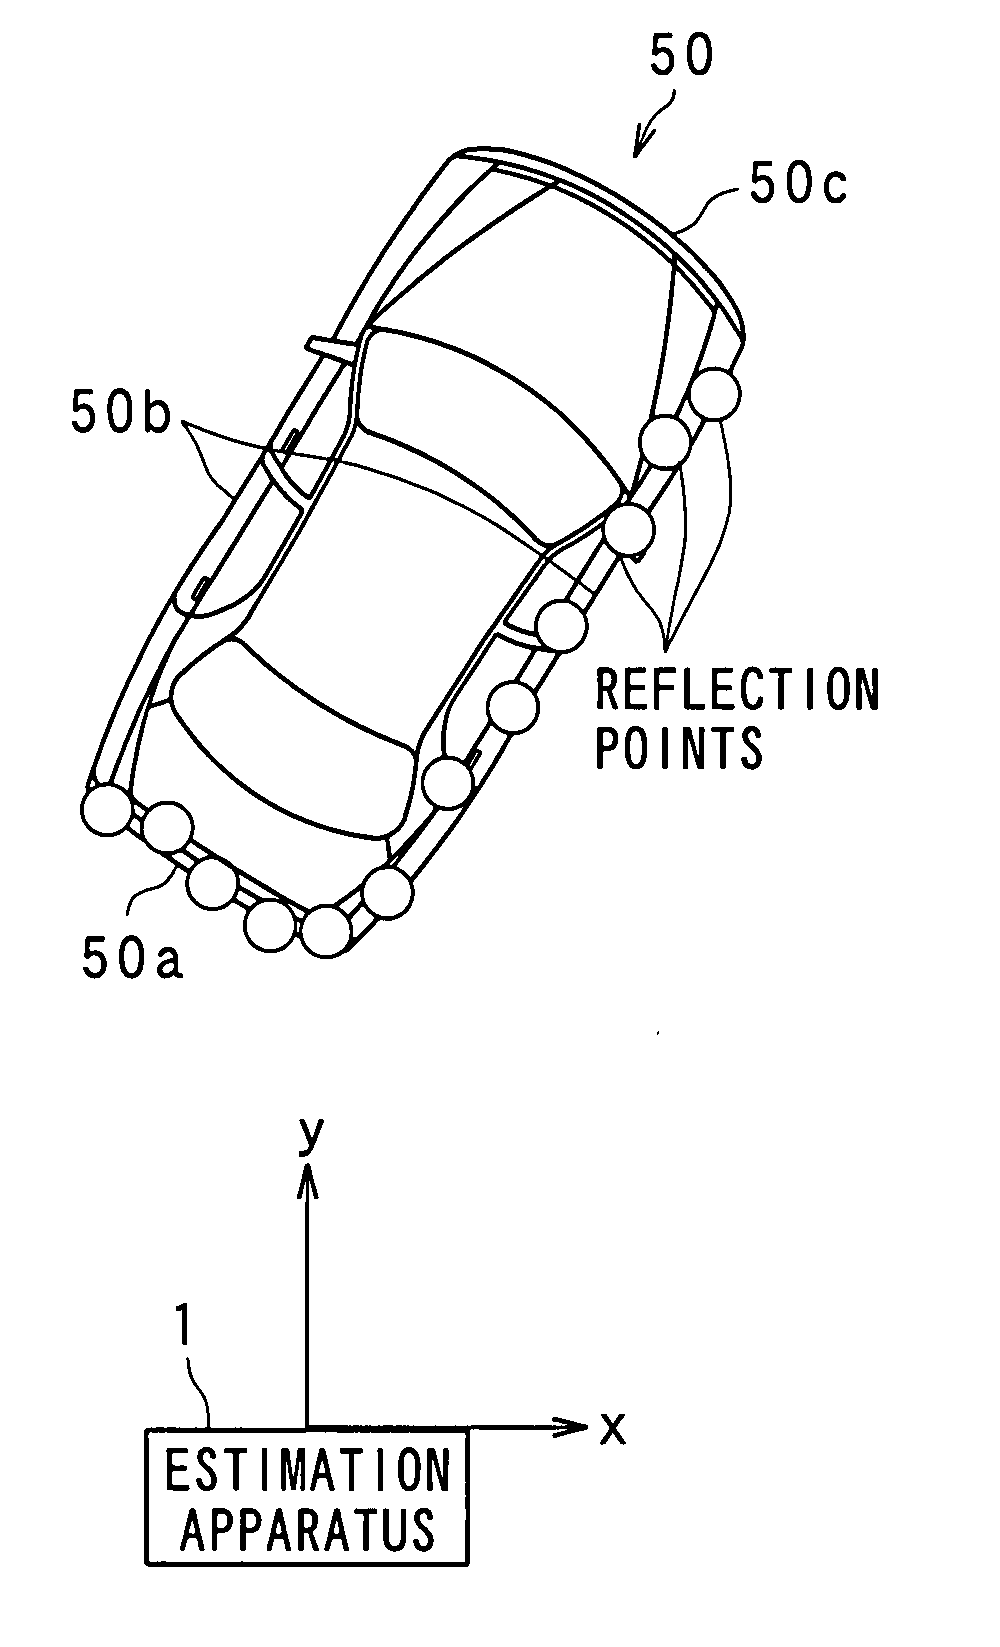 Apparatus for estimating state of vehicle located in frontward field